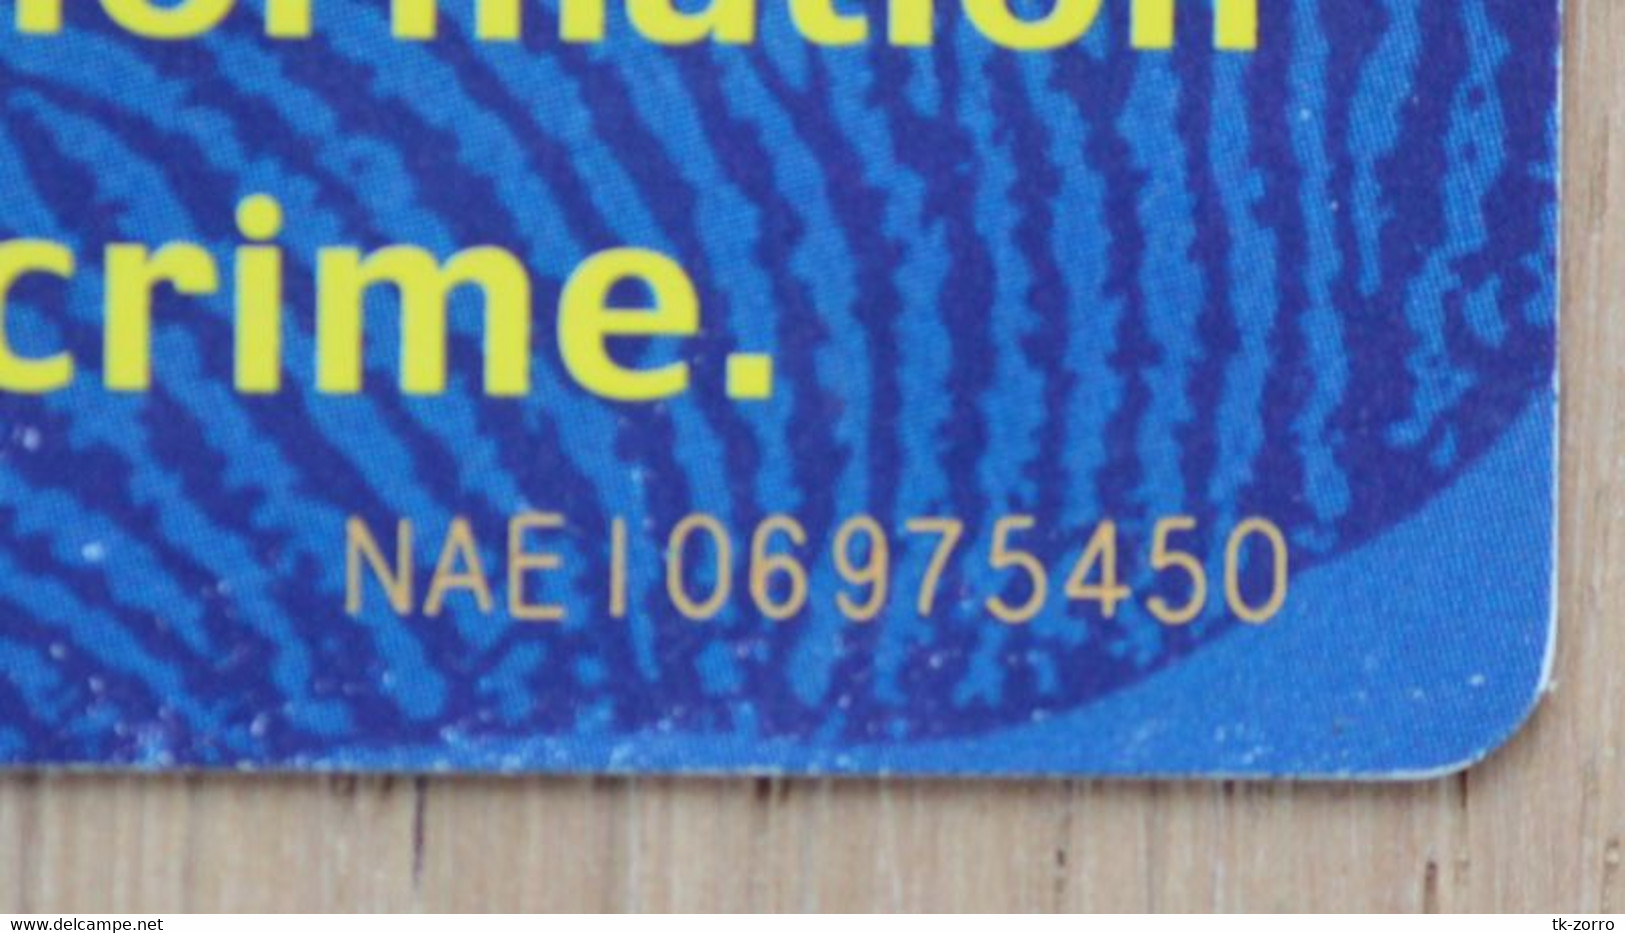 Namibia Phonecard Stop Crime 20 Namibia Dollar , I In NAEI Without Hat And Shoes, Not Listed In Colnect - Namibia